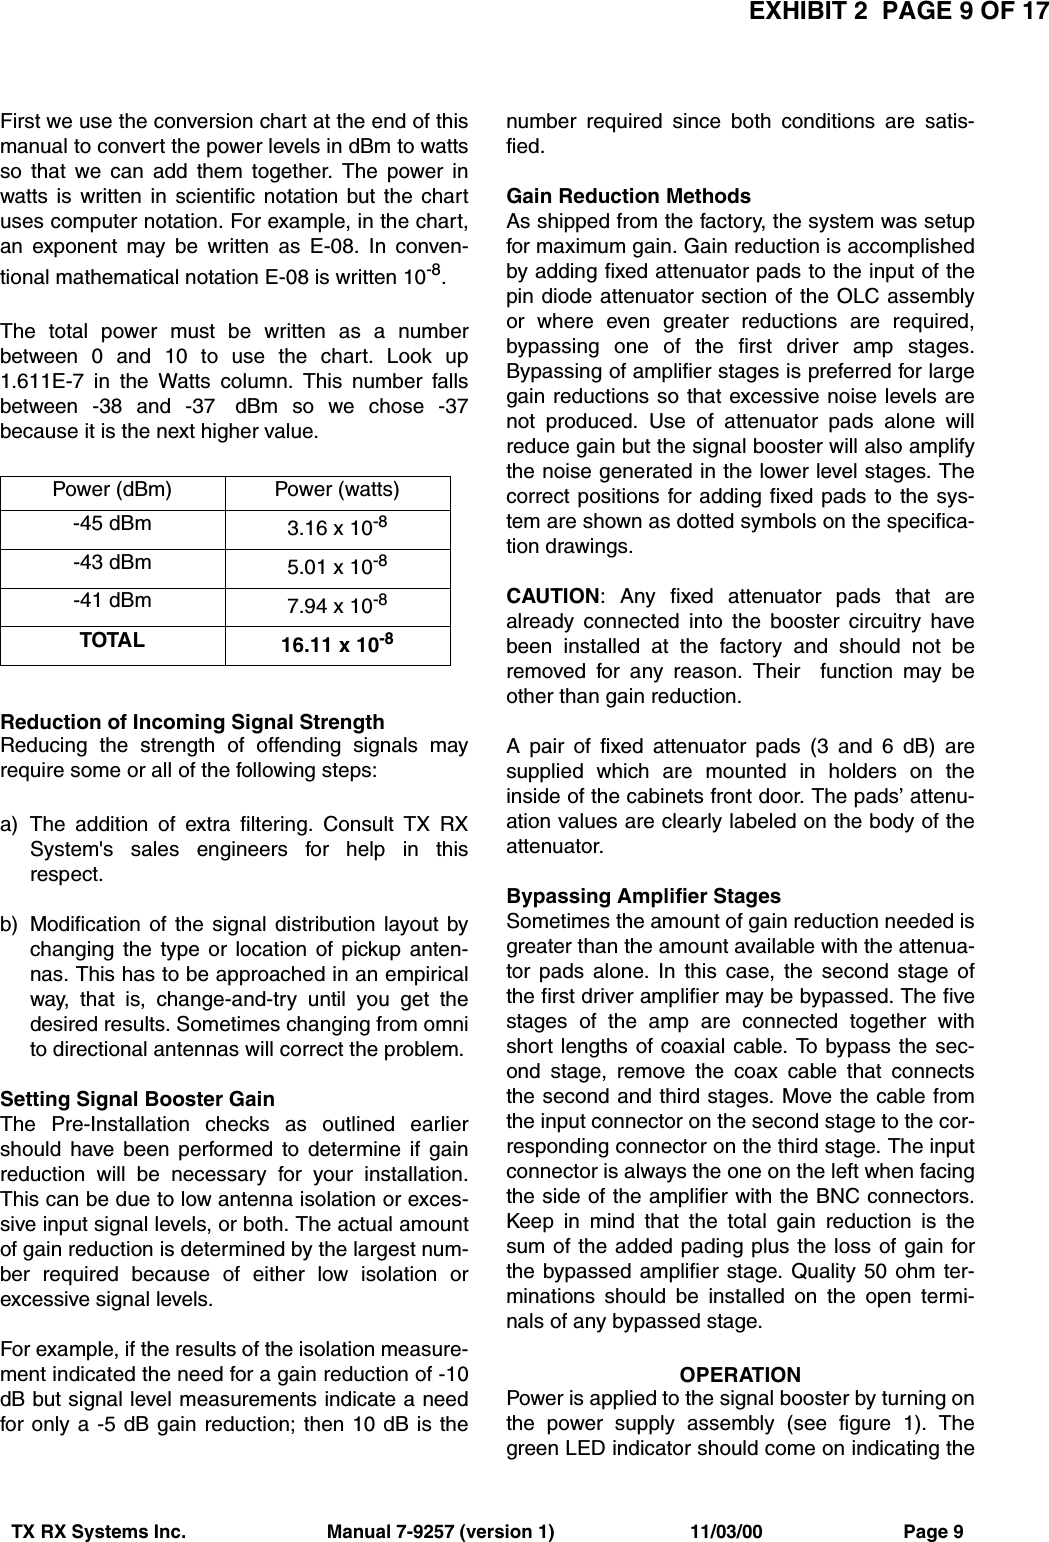 EXHIBIT 2  PAGE 9 OF 17TX RX Systems Inc.                           Manual 7-9257 (version 1)                          11/03/00                           Page 9First we use the conversion chart at the end of thismanual to convert the power levels in dBm to wattsso that we can add them together. The power inwatts is written in scientific notation but the chartuses computer notation. For example, in the chart,an exponent may be written as E-08. In conven-tional mathematical notation E-08 is written 10-8.The total power must be written as a numberbetween 0 and 10 to use the chart. Look up1.611E-7 in the Watts column. This number fallsbetween -38 and -37  dBm so we chose -37because it is the next higher value.Reduction of Incoming Signal StrengthReducing the strength of offending signals mayrequire some or all of the following steps:a) The addition of extra filtering. Consult TX RXSystem&apos;s sales engineers for help in thisrespect.b) Modification of the signal distribution layout bychanging the type or location of pickup anten-nas. This has to be approached in an empiricalway, that is, change-and-try until you get thedesired results. Sometimes changing from omnito directional antennas will correct the problem.Setting Signal Booster GainThe Pre-Installation checks as outlined earliershould have been performed to determine if gainreduction will be necessary for your installation.This can be due to low antenna isolation or exces-sive input signal levels, or both. The actual amountof gain reduction is determined by the largest num-ber required because of either low isolation orexcessive signal levels.For example, if the results of the isolation measure-ment indicated the need for a gain reduction of -10dB but signal level measurements indicate a needfor only a -5 dB gain reduction; then 10 dB is thenumber required since both conditions are satis-fied.Gain Reduction MethodsAs shipped from the factory, the system was setupfor maximum gain. Gain reduction is accomplishedby adding fixed attenuator pads to the input of thepin diode attenuator section of the OLC assemblyor where even greater reductions are required,bypassing one of the first driver amp stages.Bypassing of amplifier stages is preferred for largegain reductions so that excessive noise levels arenot produced. Use of attenuator pads alone willreduce gain but the signal booster will also amplifythe noise generated in the lower level stages. Thecorrect positions for adding fixed pads to the sys-tem are shown as dotted symbols on the specifica-tion drawings.CAUTION: Any fixed attenuator pads that arealready connected into the booster circuitry havebeen installed at the factory and should not beremoved for any reason. Their  function may beother than gain reduction.A pair of fixed attenuator pads (3 and 6 dB) aresupplied which are mounted in holders on theinside of the cabinets front door. The pads’ attenu-ation values are clearly labeled on the body of theattenuator.Bypassing Amplifier StagesSometimes the amount of gain reduction needed isgreater than the amount available with the attenua-tor pads alone. In this case, the second stage ofthe first driver amplifier may be bypassed. The fivestages of the amp are connected together withshort lengths of coaxial cable. To bypass the sec-ond stage, remove the coax cable that connectsthe second and third stages. Move the cable fromthe input connector on the second stage to the cor-responding connector on the third stage. The inputconnector is always the one on the left when facingthe side of the amplifier with the BNC connectors.Keep in mind that the total gain reduction is thesum of the added pading plus the loss of gain forthe bypassed amplifier stage. Quality 50 ohm ter-minations should be installed on the open termi-nals of any bypassed stage.OPERATIONPower is applied to the signal booster by turning onthe power supply assembly (see figure 1). Thegreen LED indicator should come on indicating thePower (dBm) Power (watts)-45 dBm 3.16 x 10-8-43 dBm 5.01 x 10-8-41 dBm 7.94 x 10-8TOTAL 16.11 x 10-8